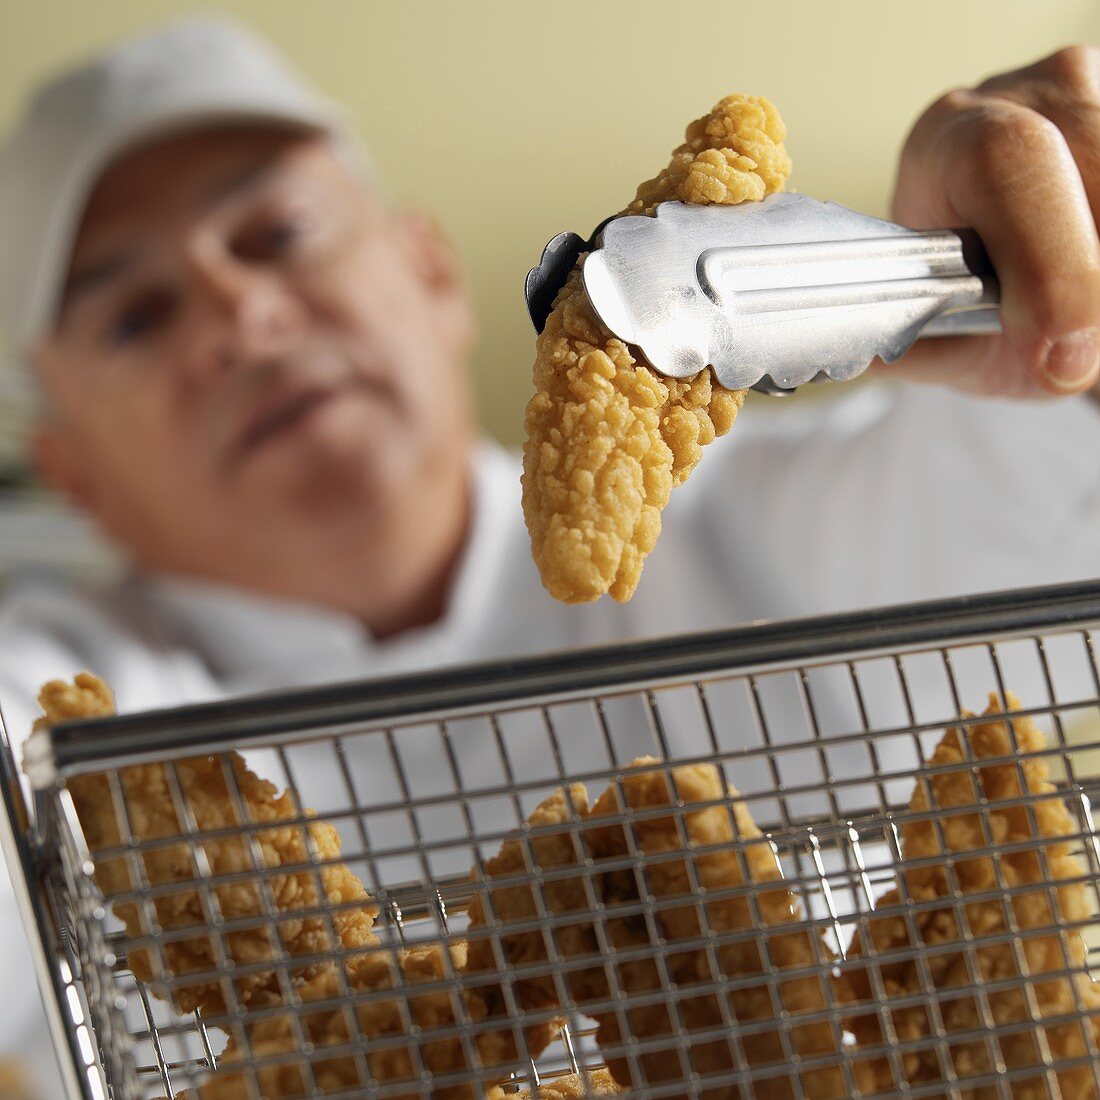 Chef taking chicken nugget out of frying basket